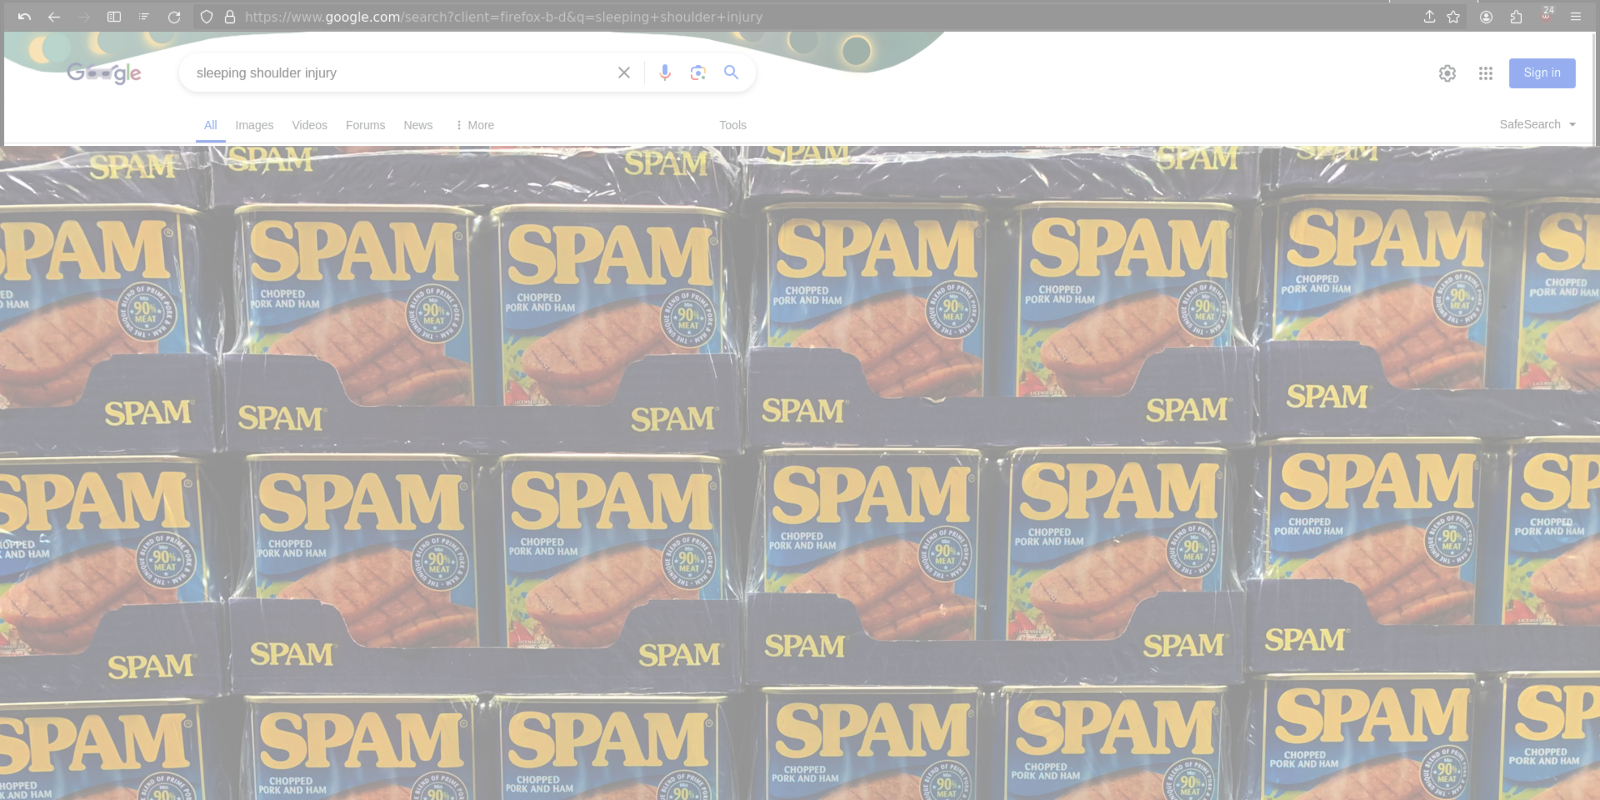 Google search results overlaid by a wall of spam cans